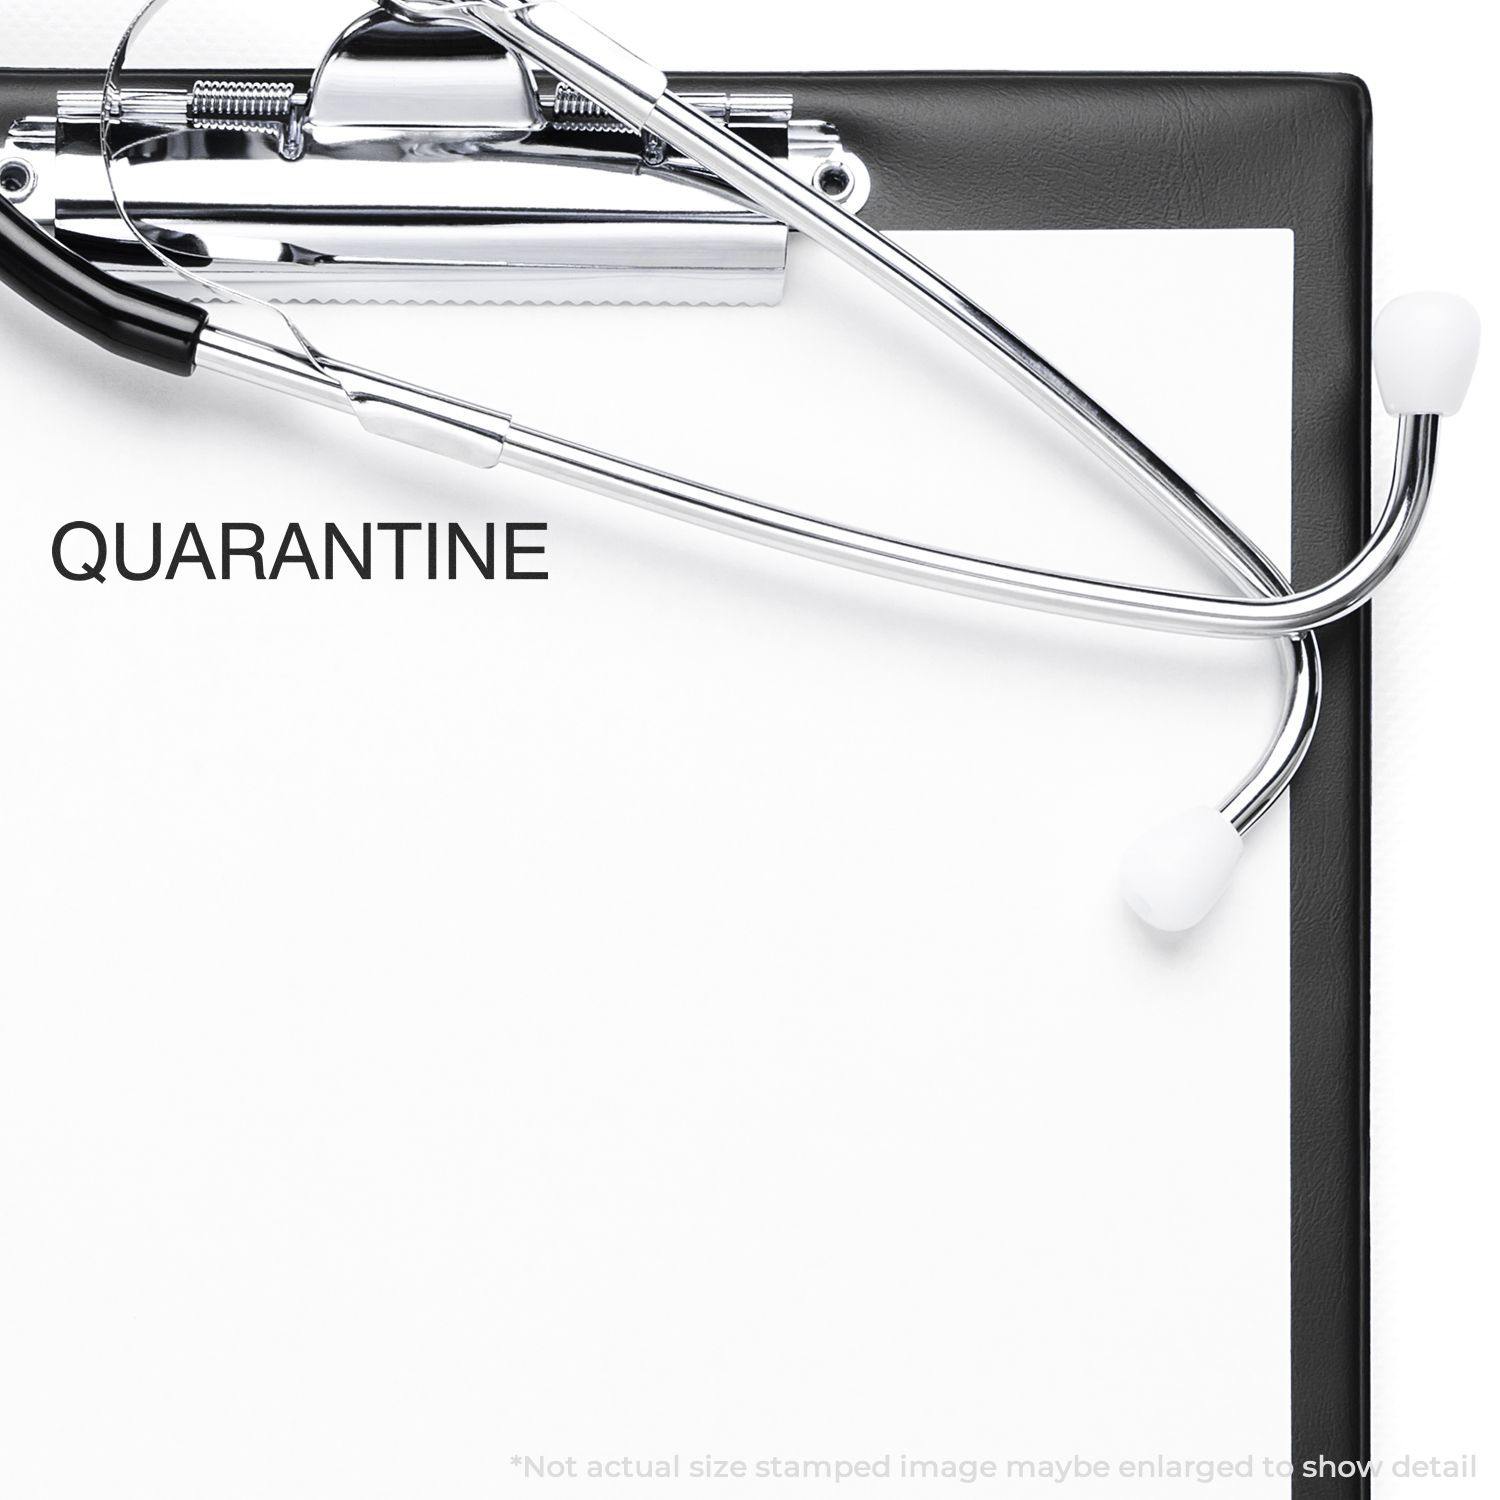 A stock office rubber stamp with a stamped image showing how the text "QUARANTINE" in a large font is displayed after stamping.